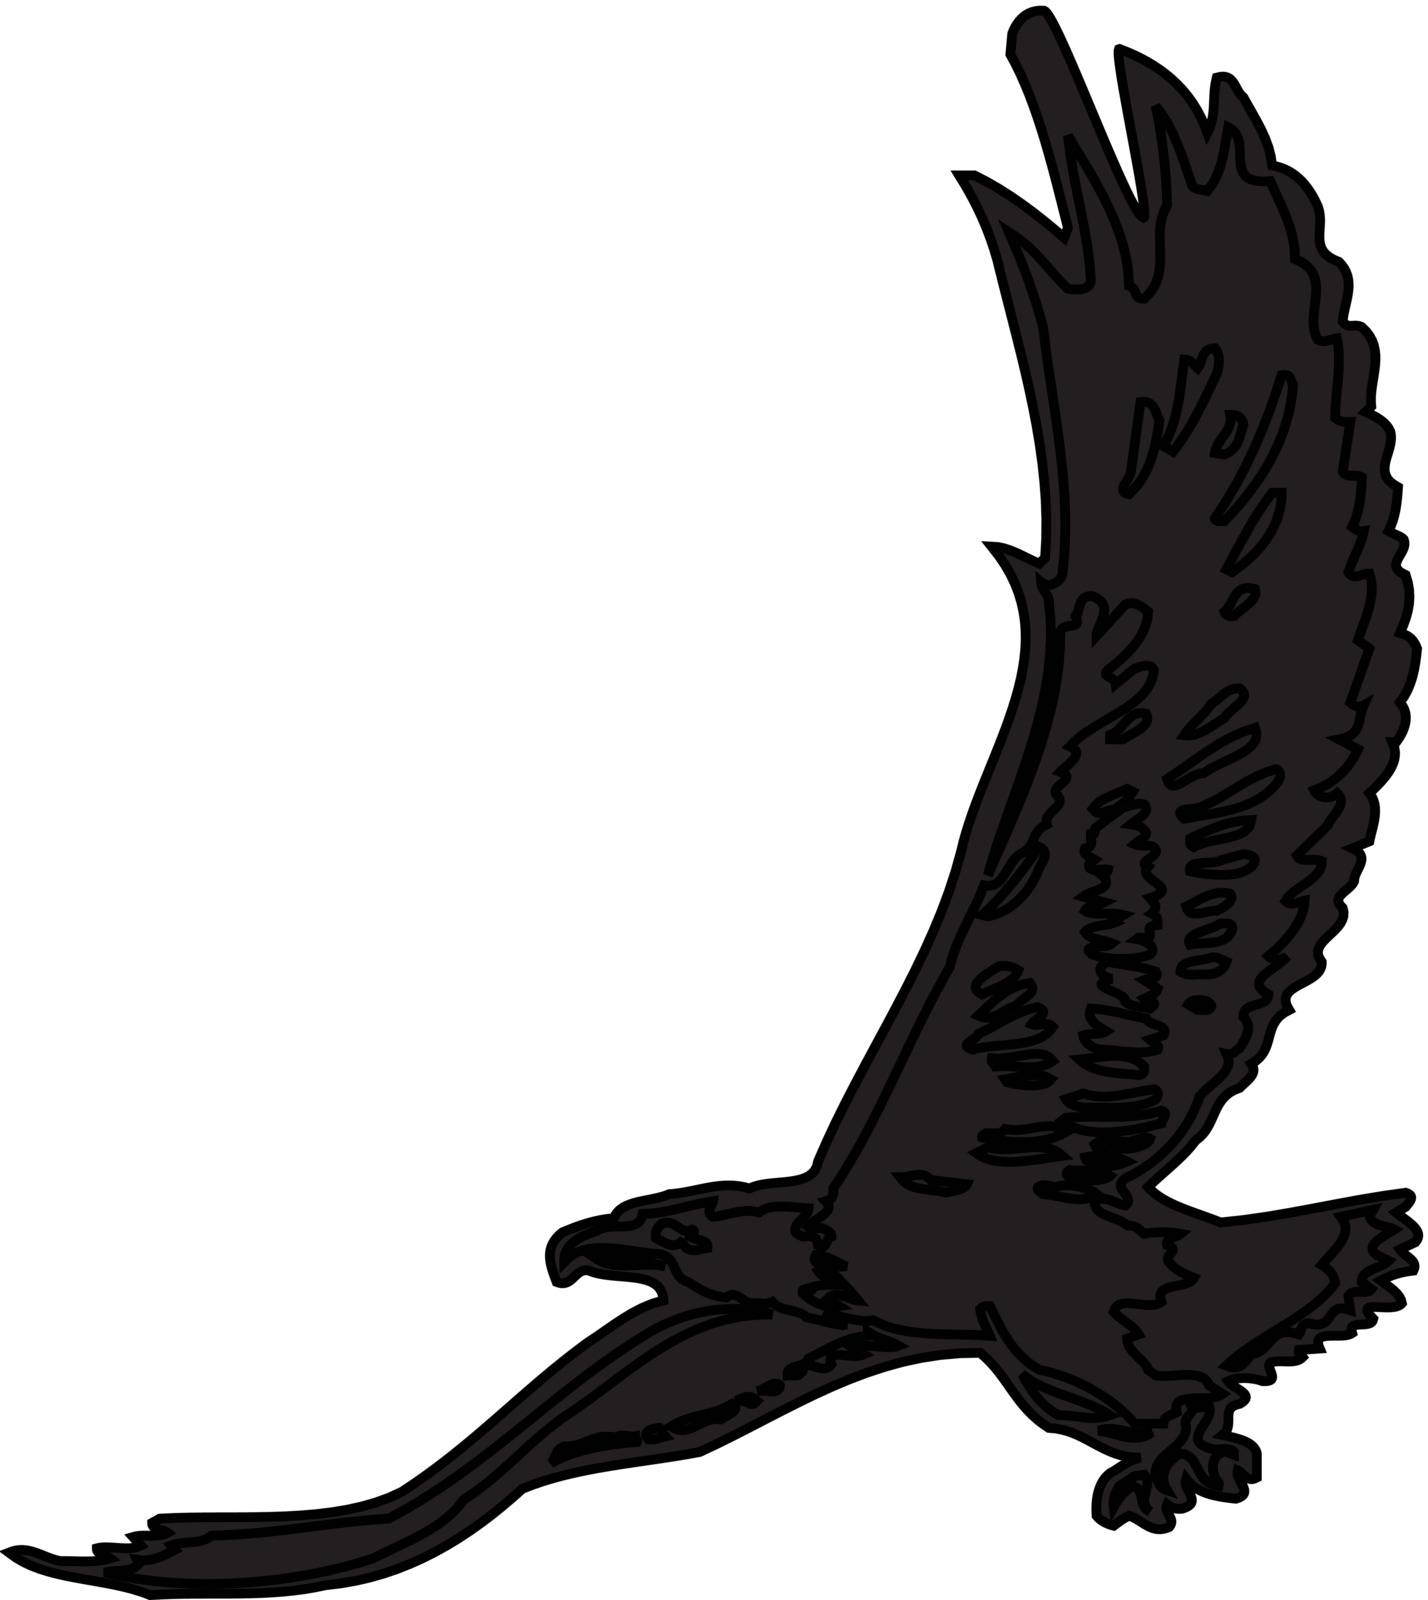 eagle silhouette vector by yurka